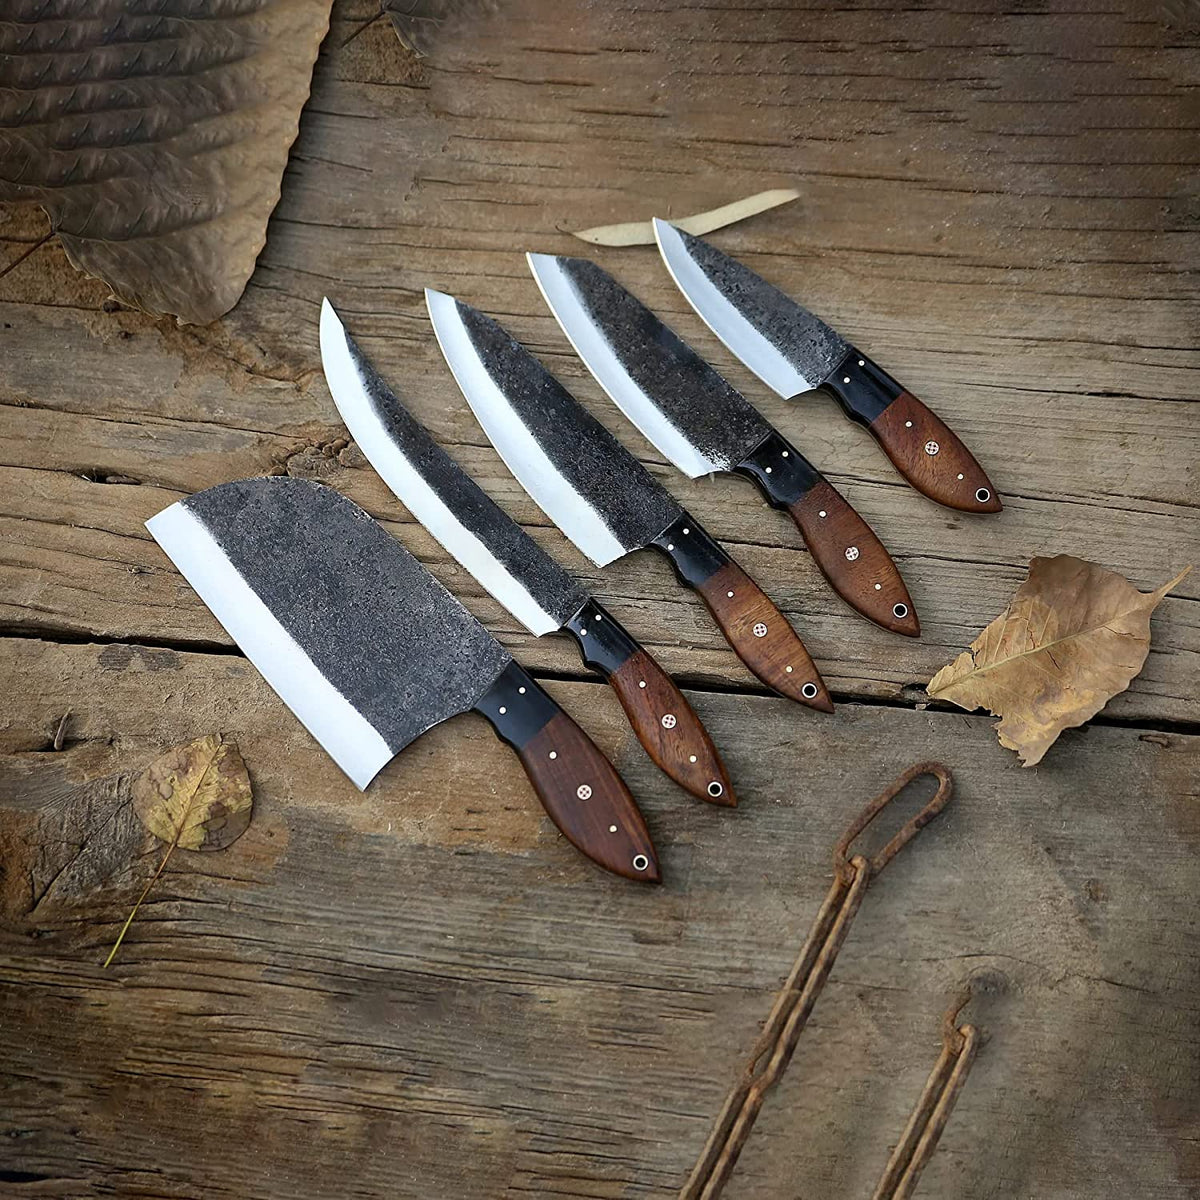 8 Barbecue Knife - Handmade for meat cutting